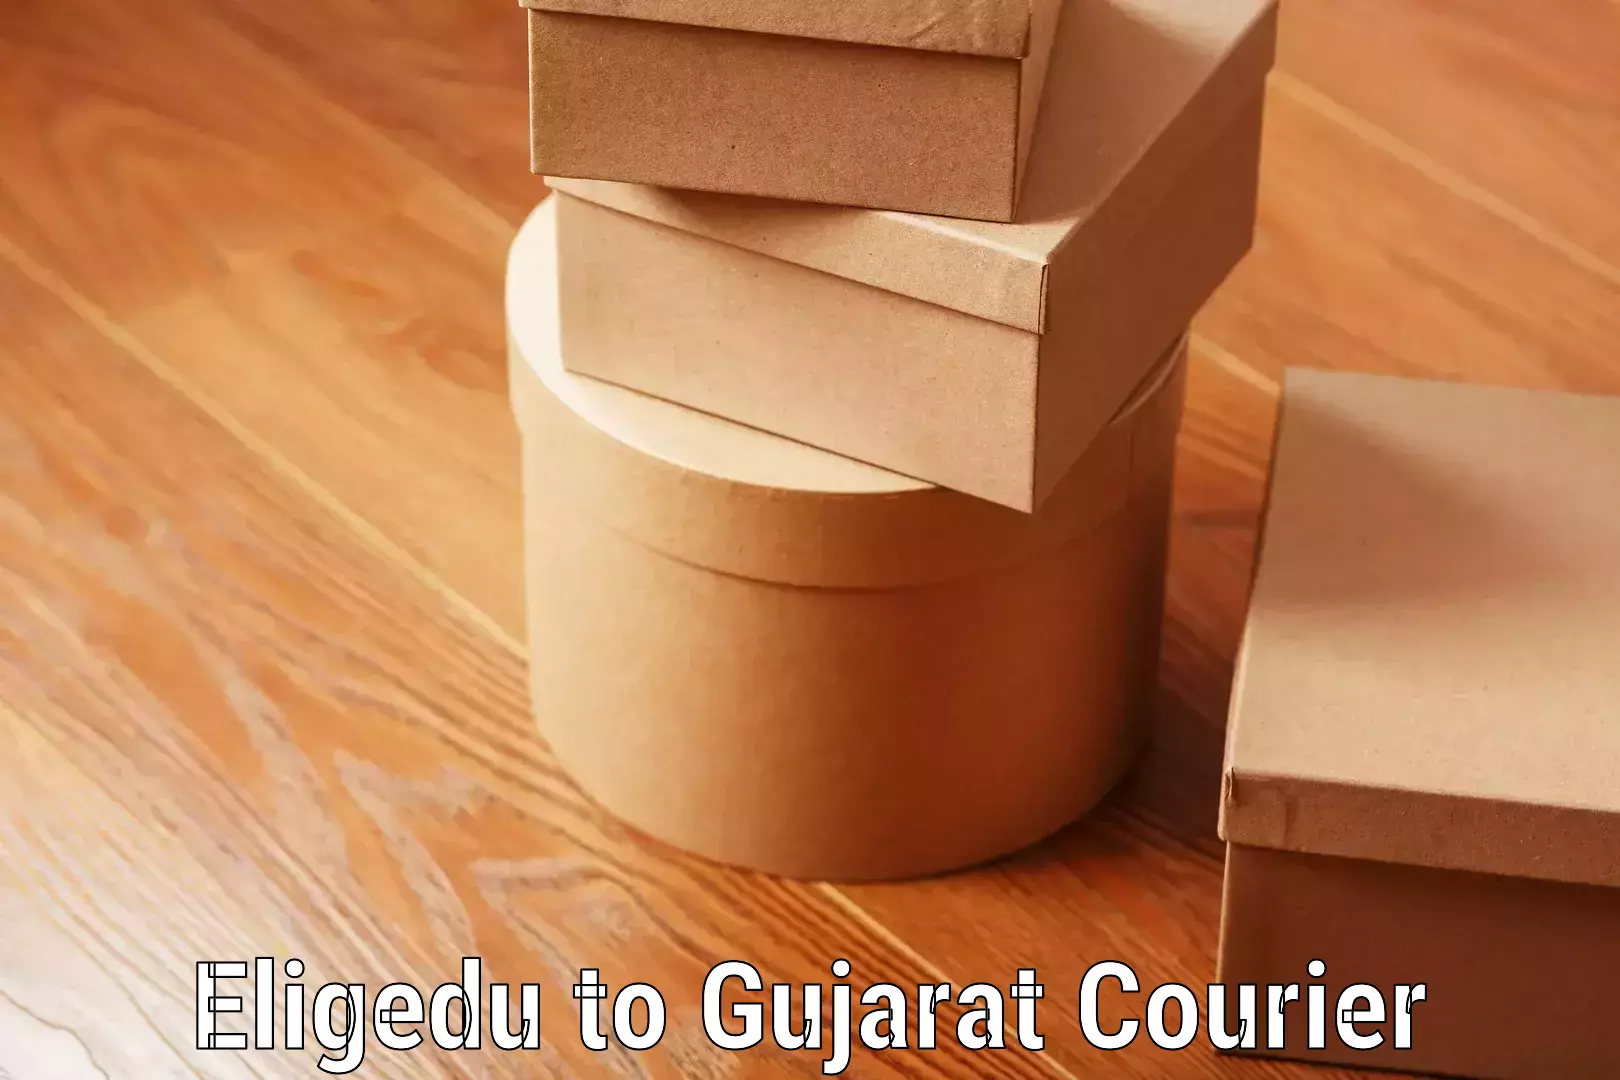 Nationwide luggage courier Eligedu to Rajkot